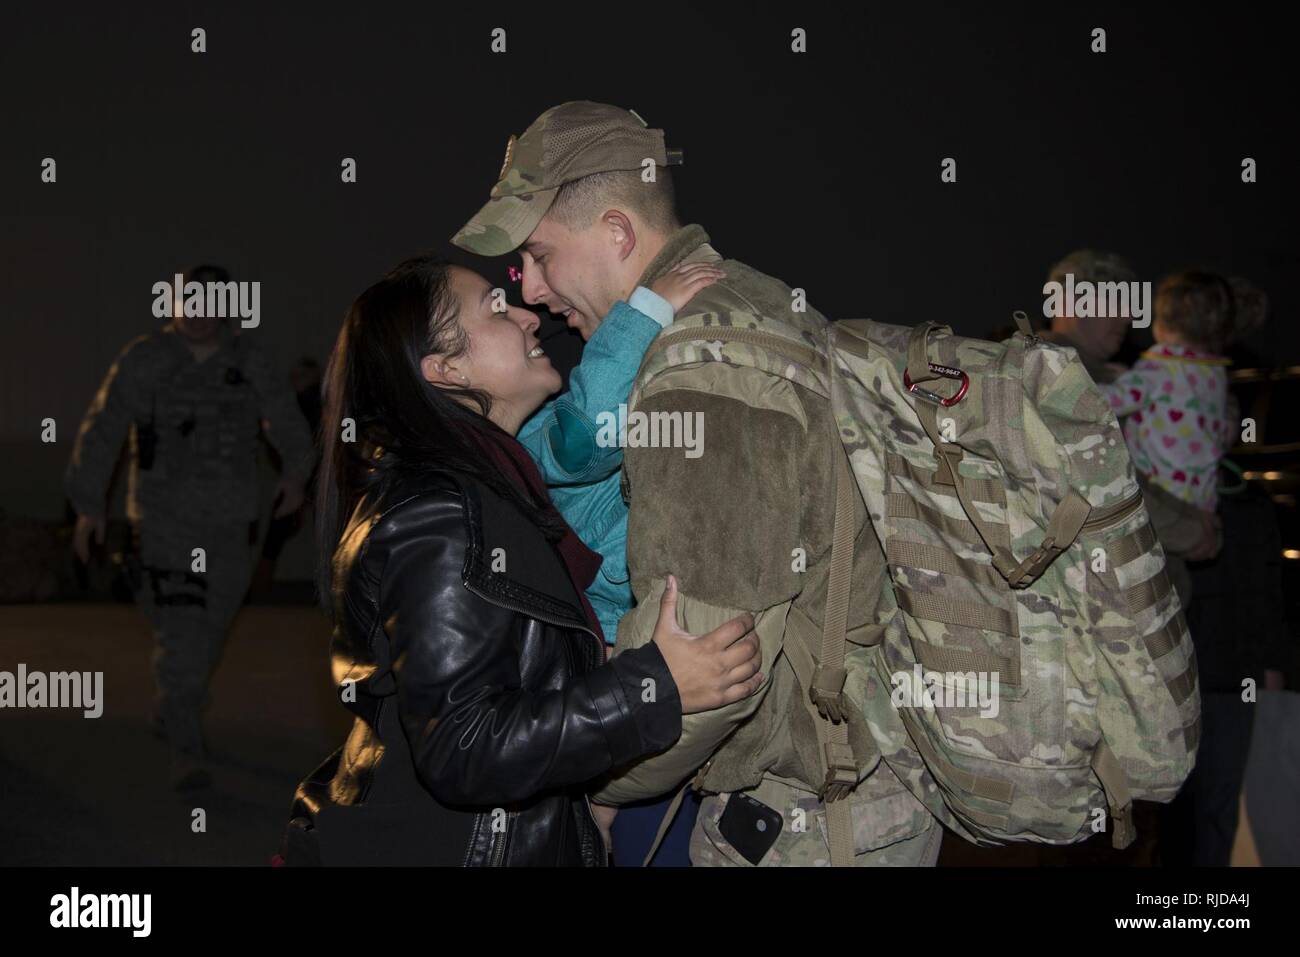 Staff Sgt. Justin Stevenson, 436th Security Forces Squadron defender, kisses his wife, Jamielee, while hugging his daughter, Julia, upon his return home from deployment to the Middle East Jan. 21, 2018, at Dover Air Force Base, Del. Stevenson’s team has been deployed since July 2017. Stock Photo